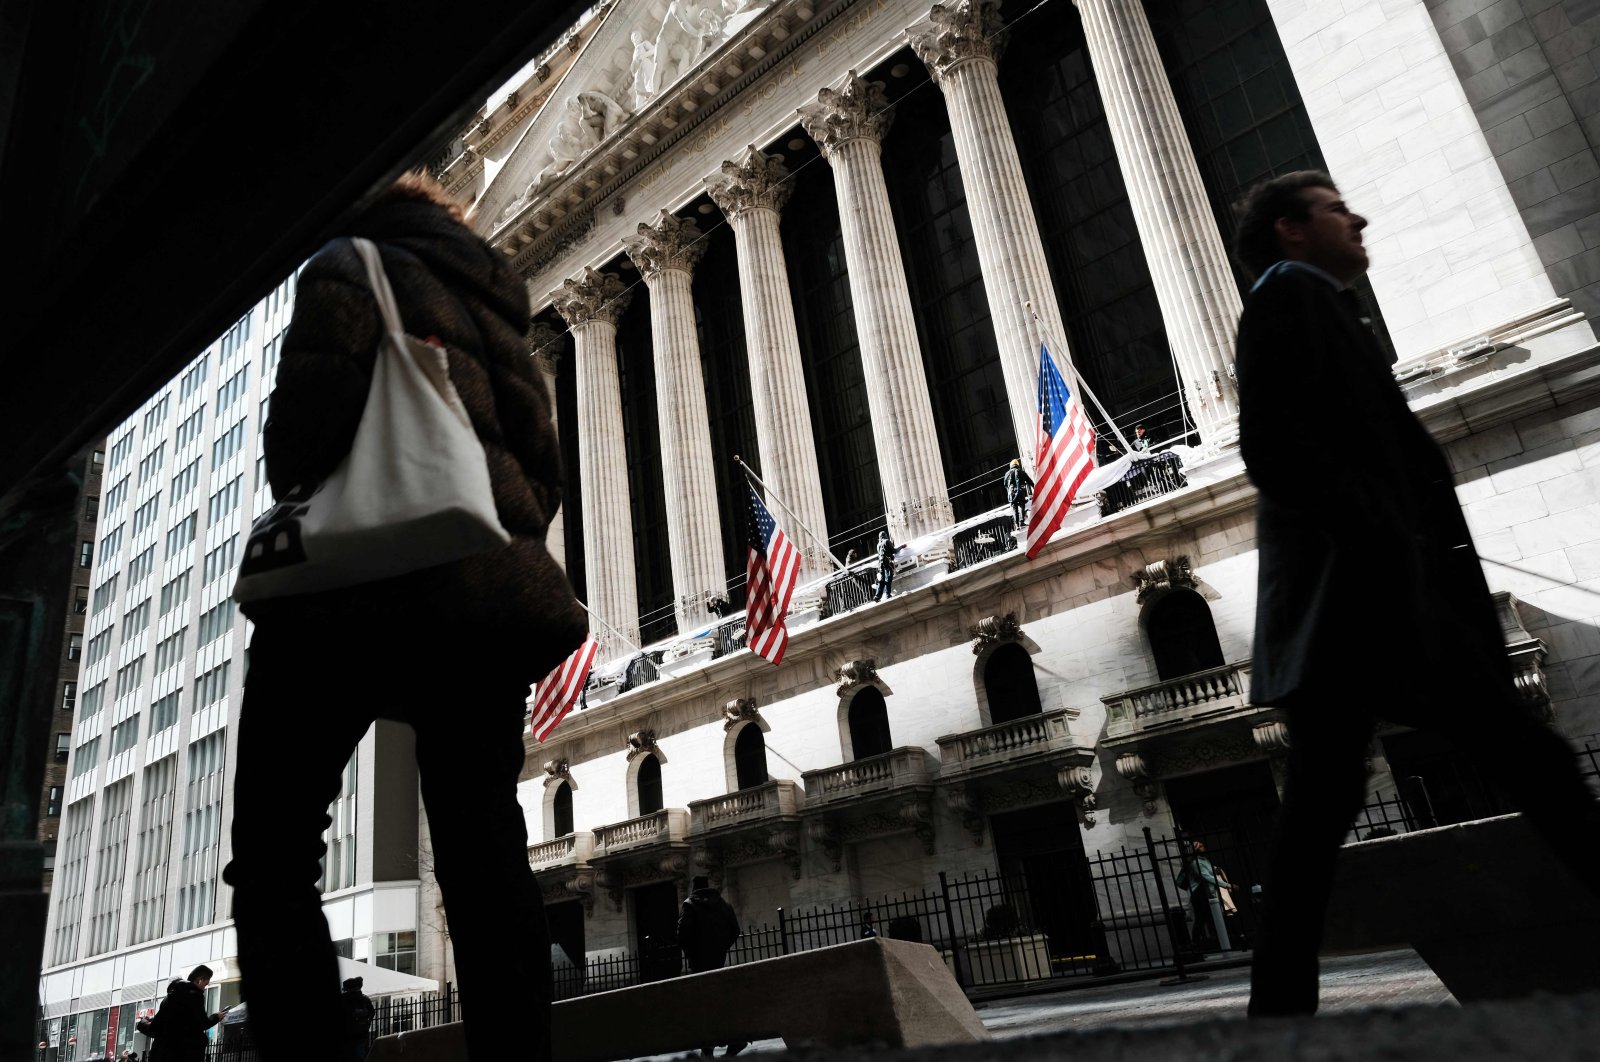 People walk by the New York Stock Exchange (NYSE) in the Financial District on March 7, 2023. (Getty Images via AFP)